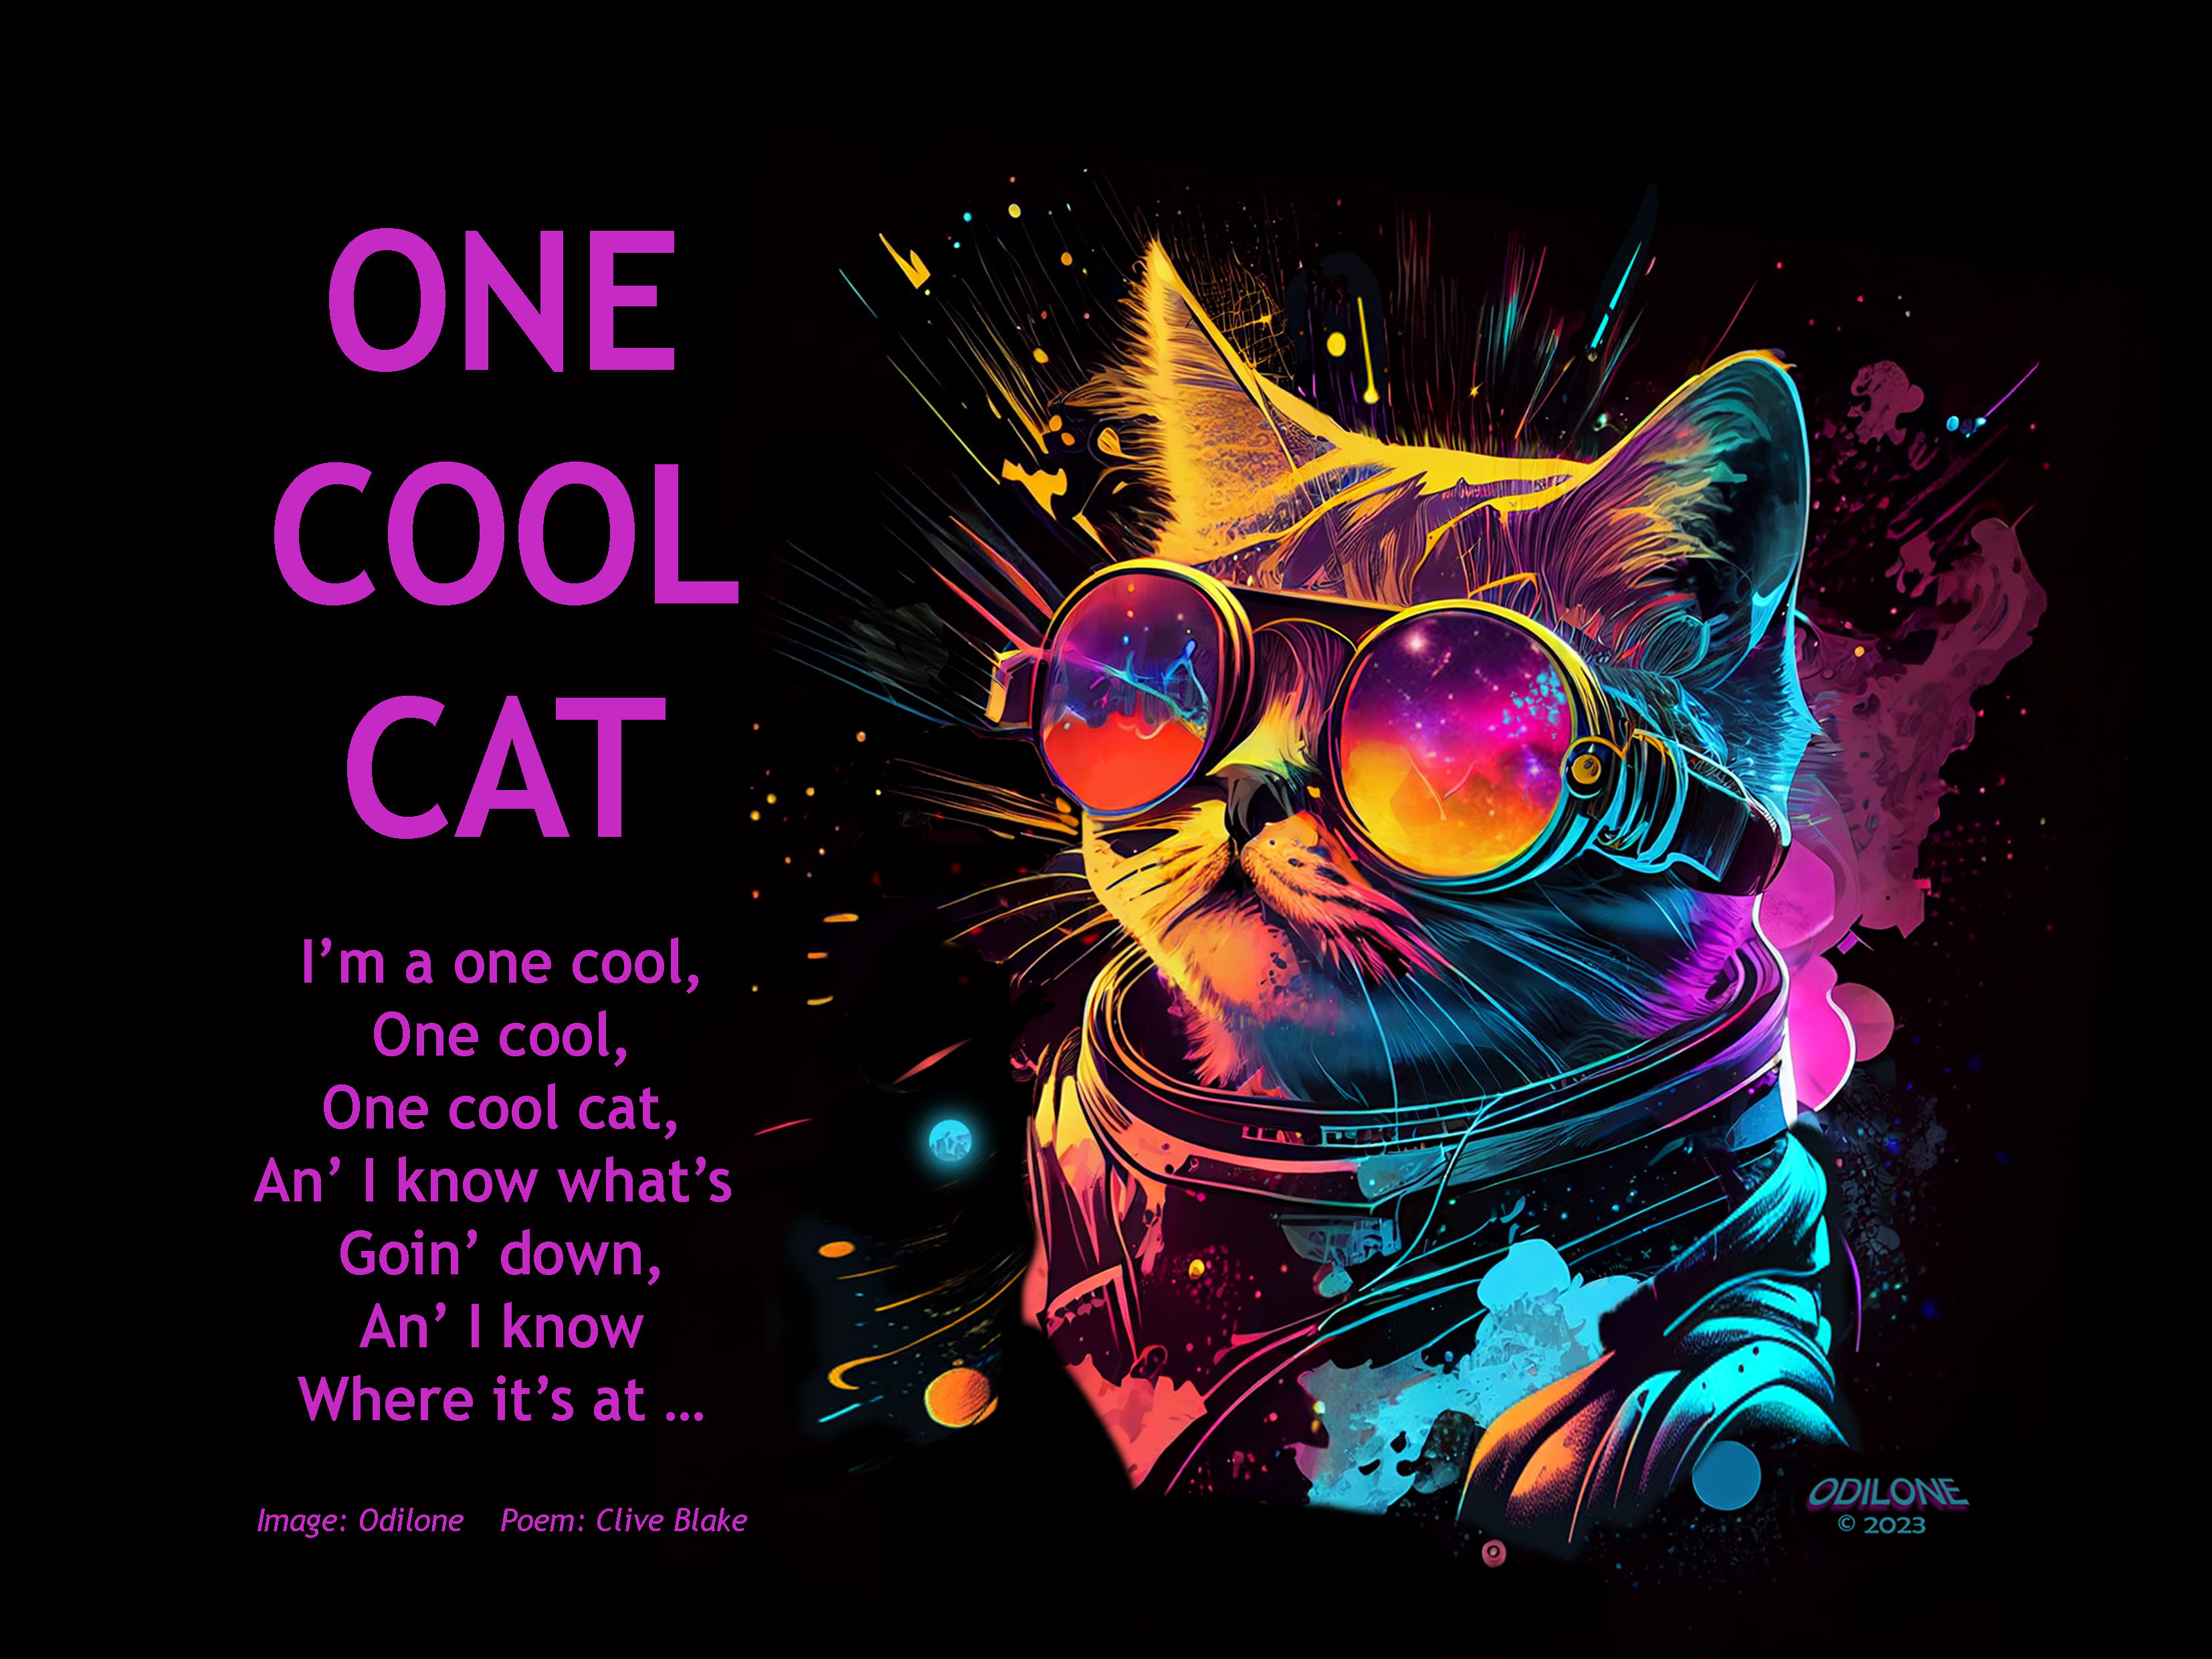 One Cool Cat